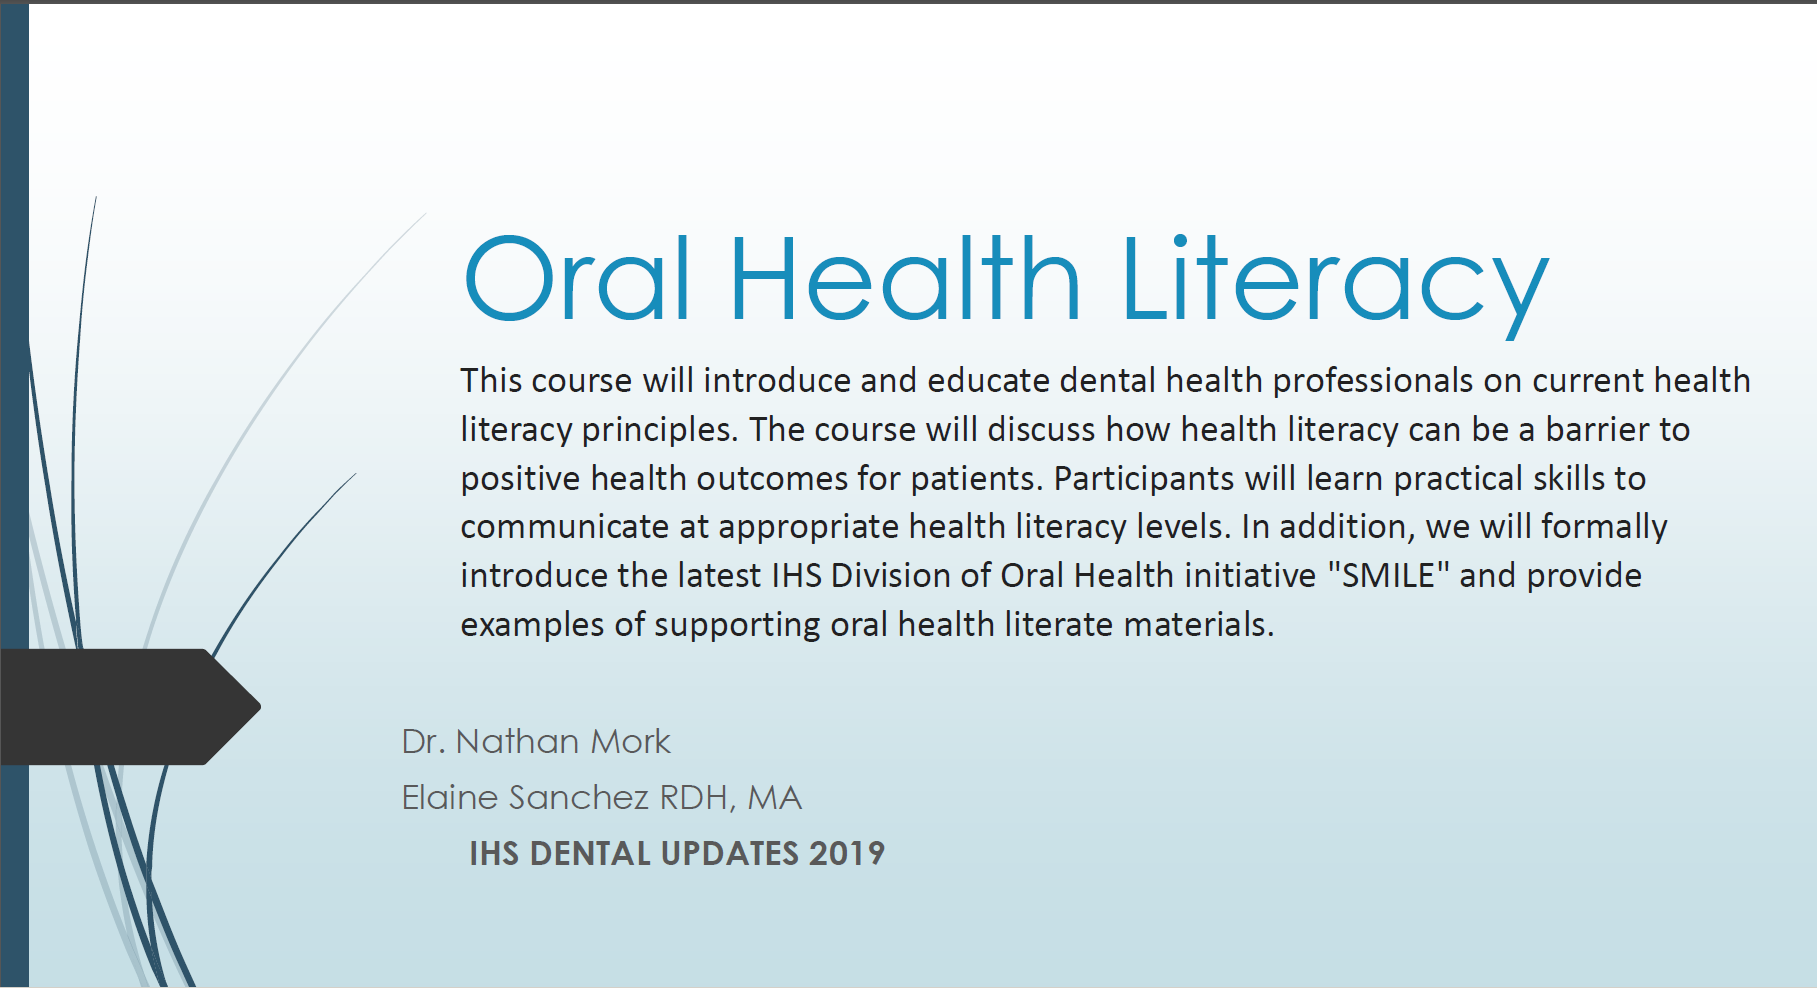 IHS Division of Oral Health Literacy